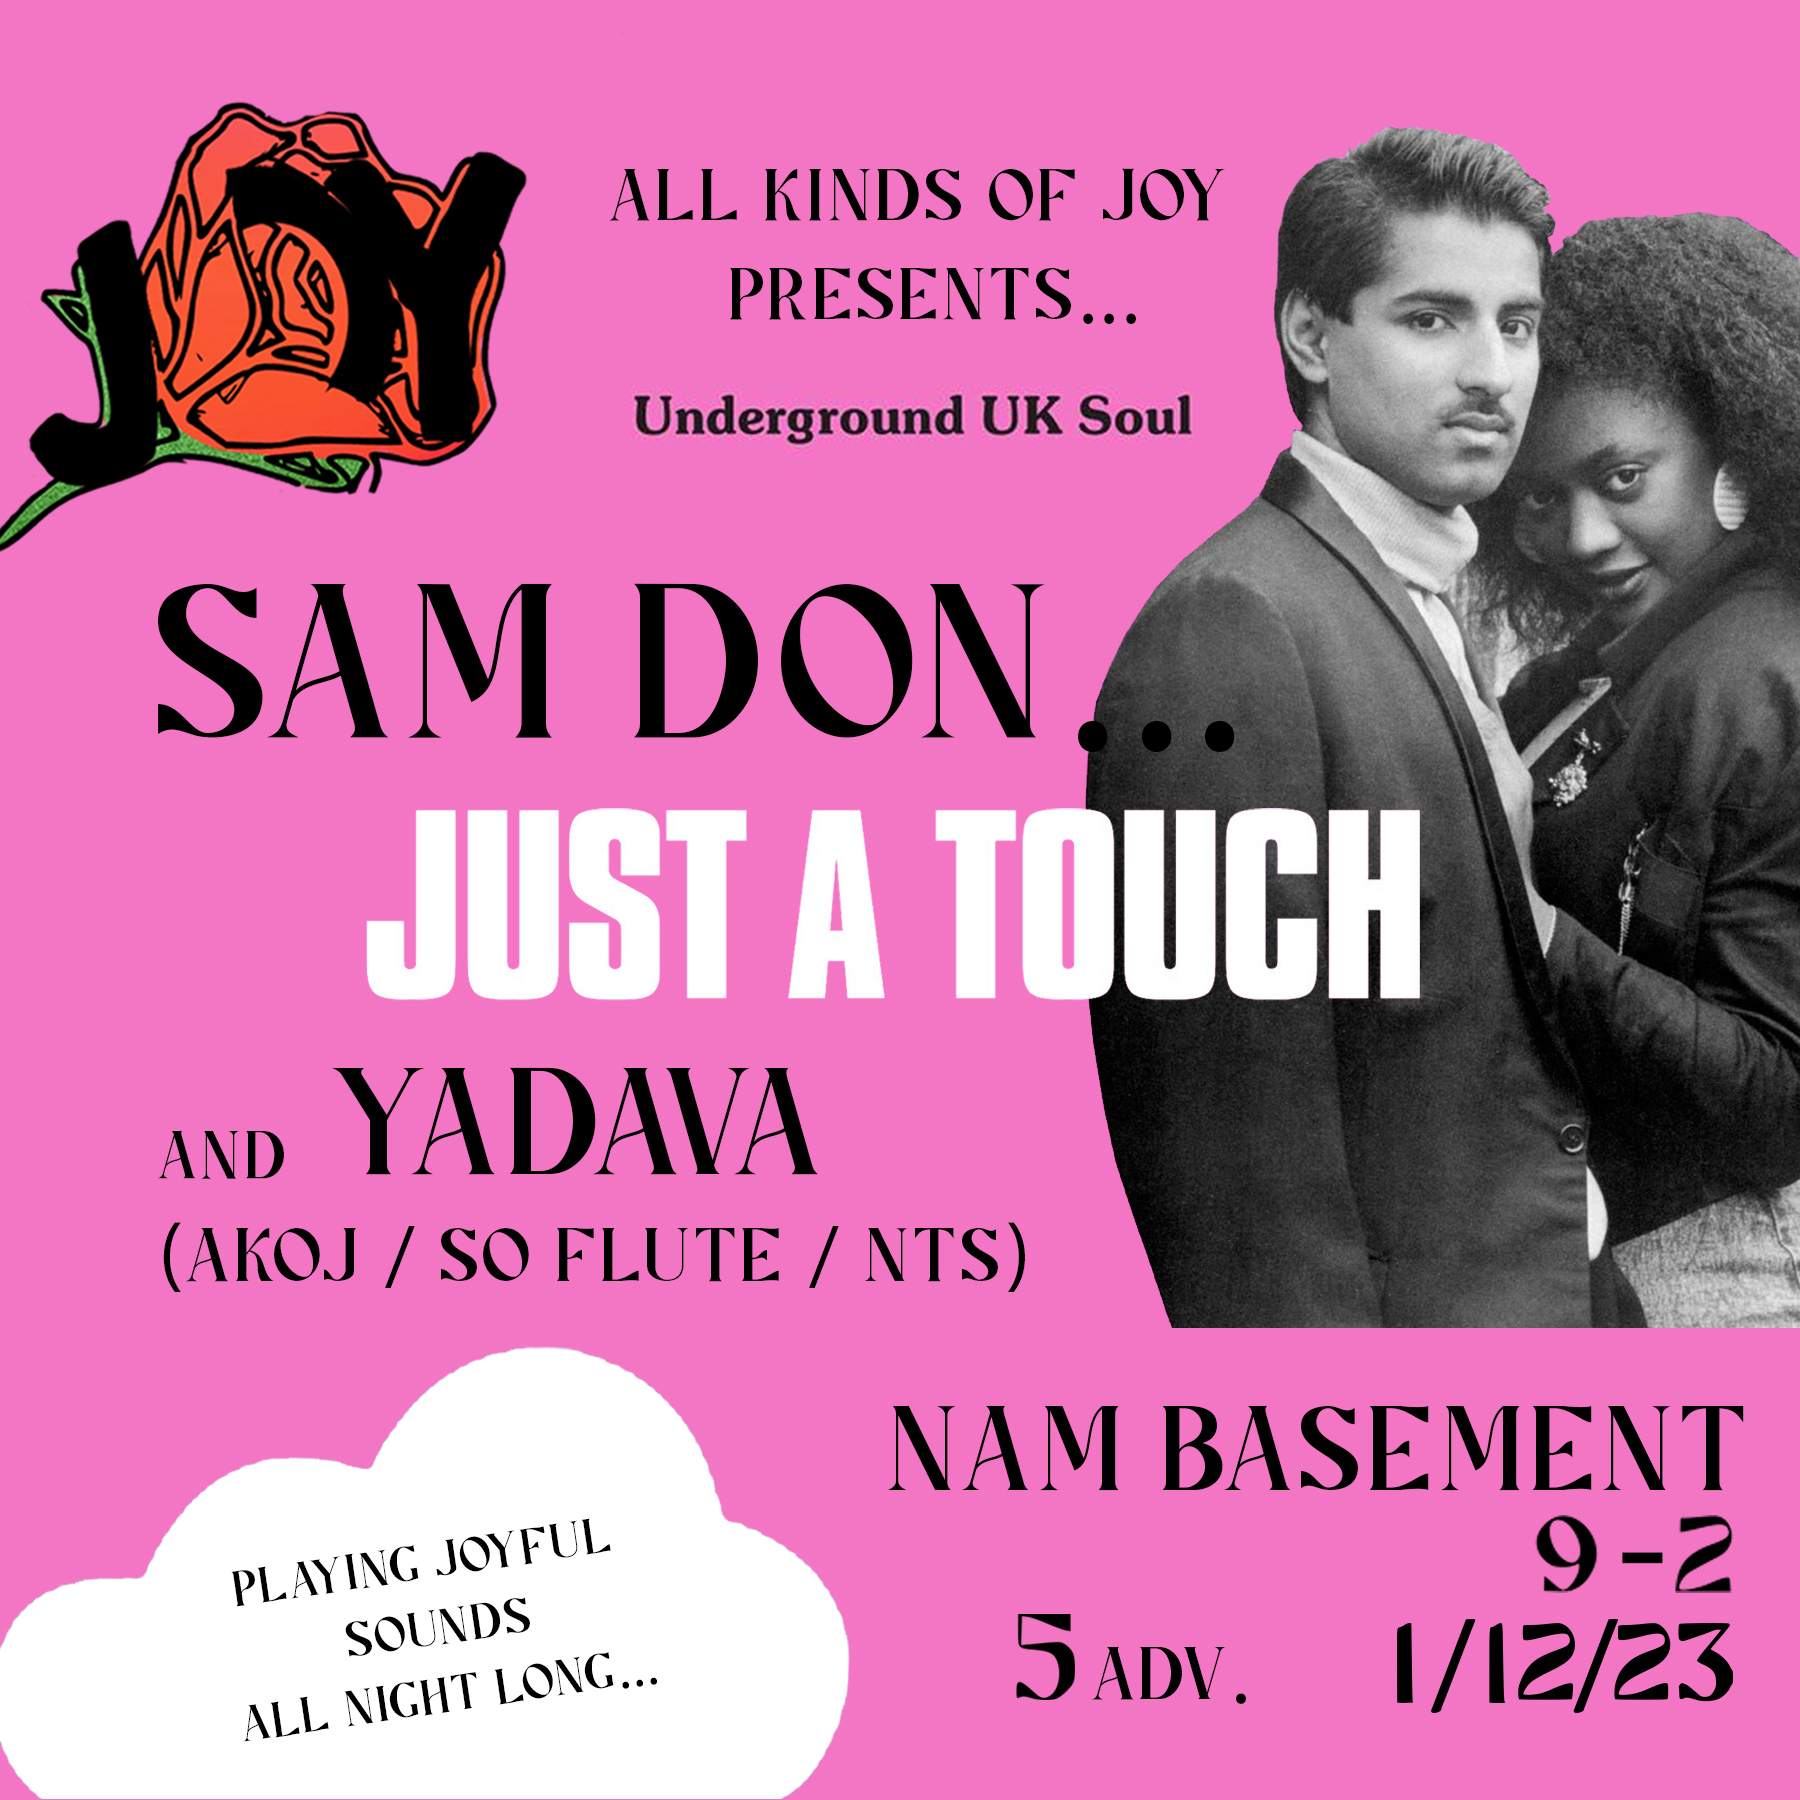 All Kinds of Joy presents Sam Don... Just a Touch - フライヤー表